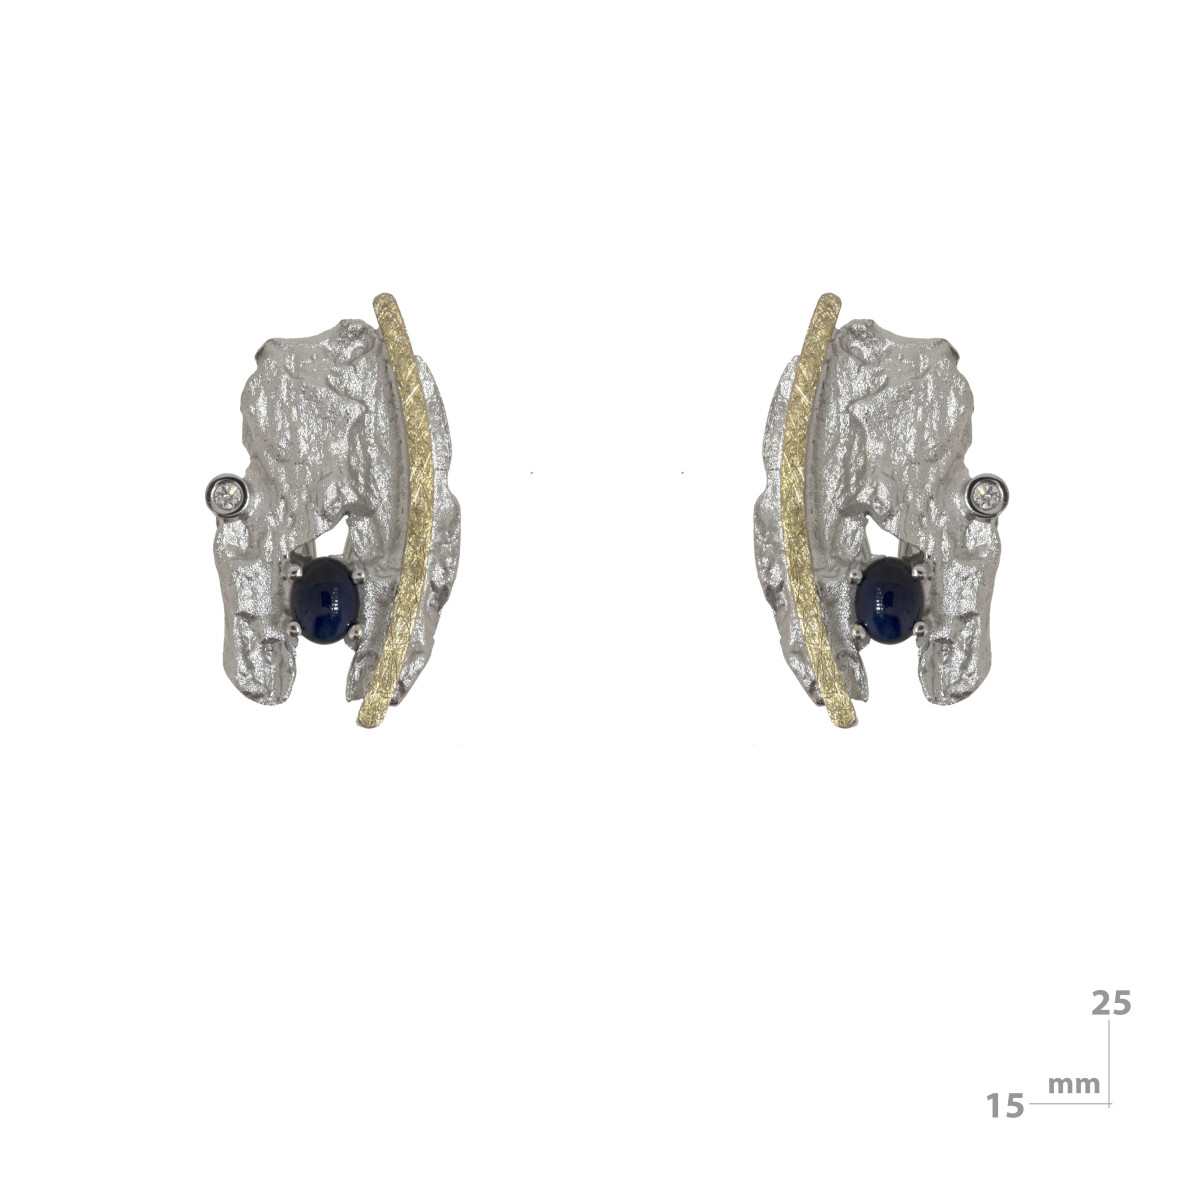 Silver, gold, sapphire and brilliant earrings